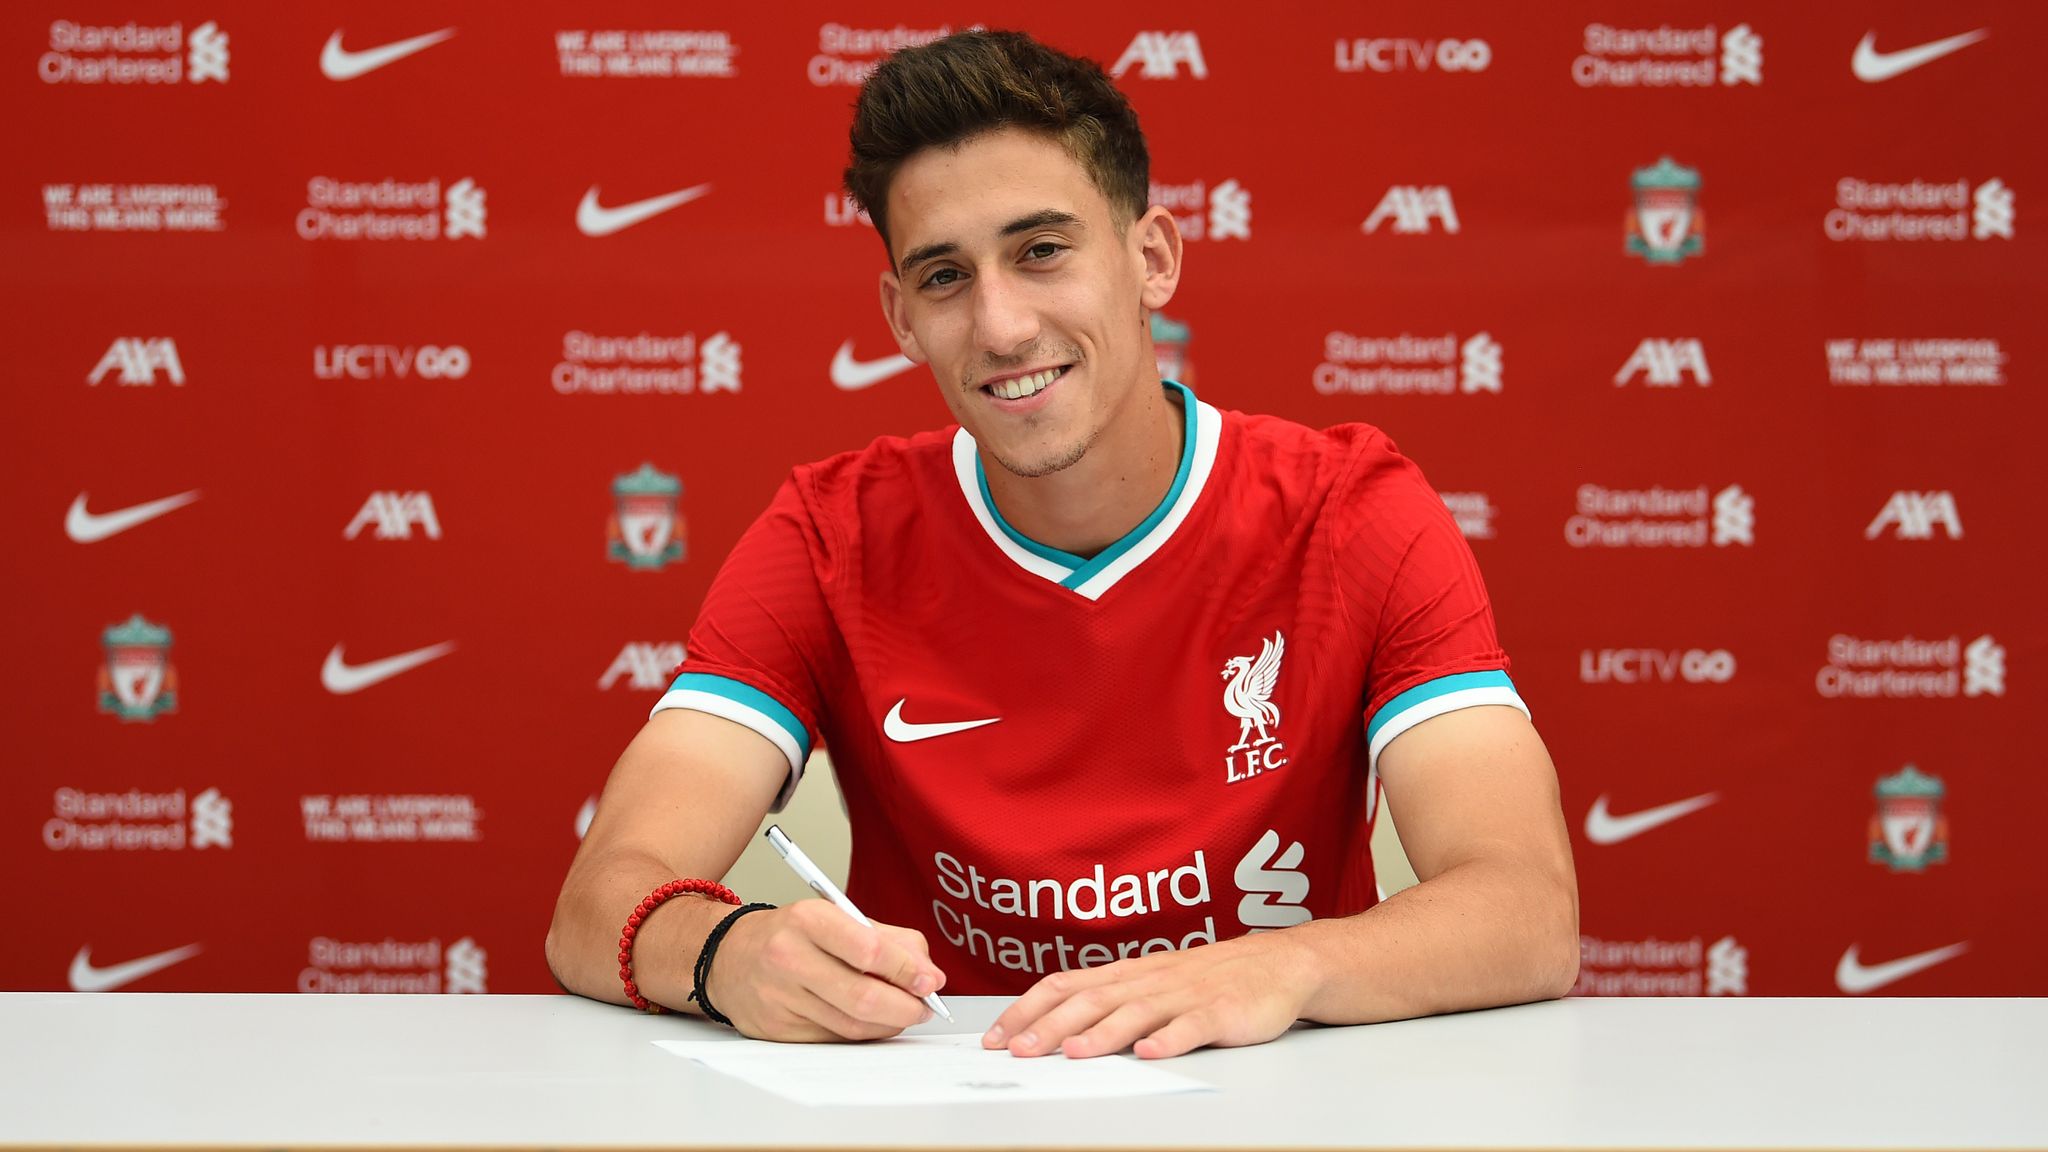 A New Update On The Future Of Kostas Tsimikas At Liverpool